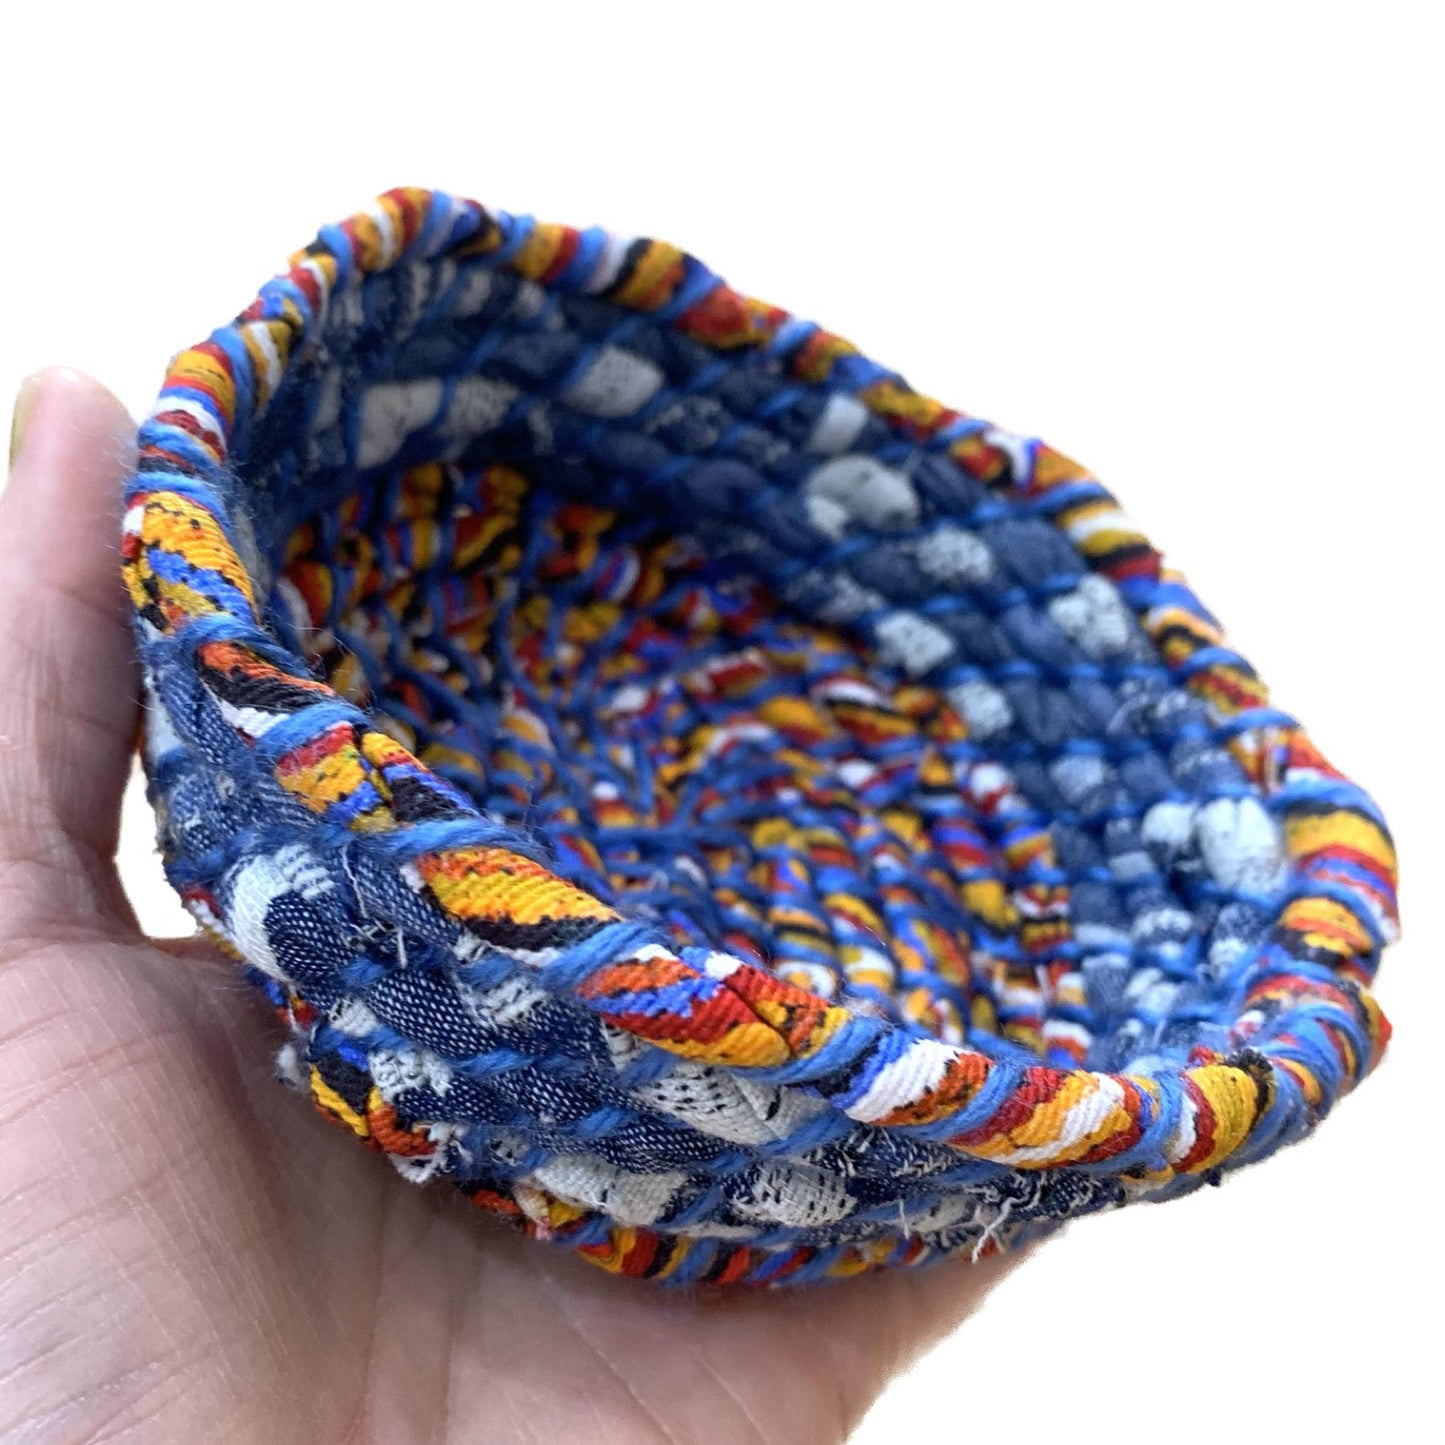 SCRAPPY BOWLS- RECYCLED FABRIC BOWLS- PRIMARY/SHIBORI